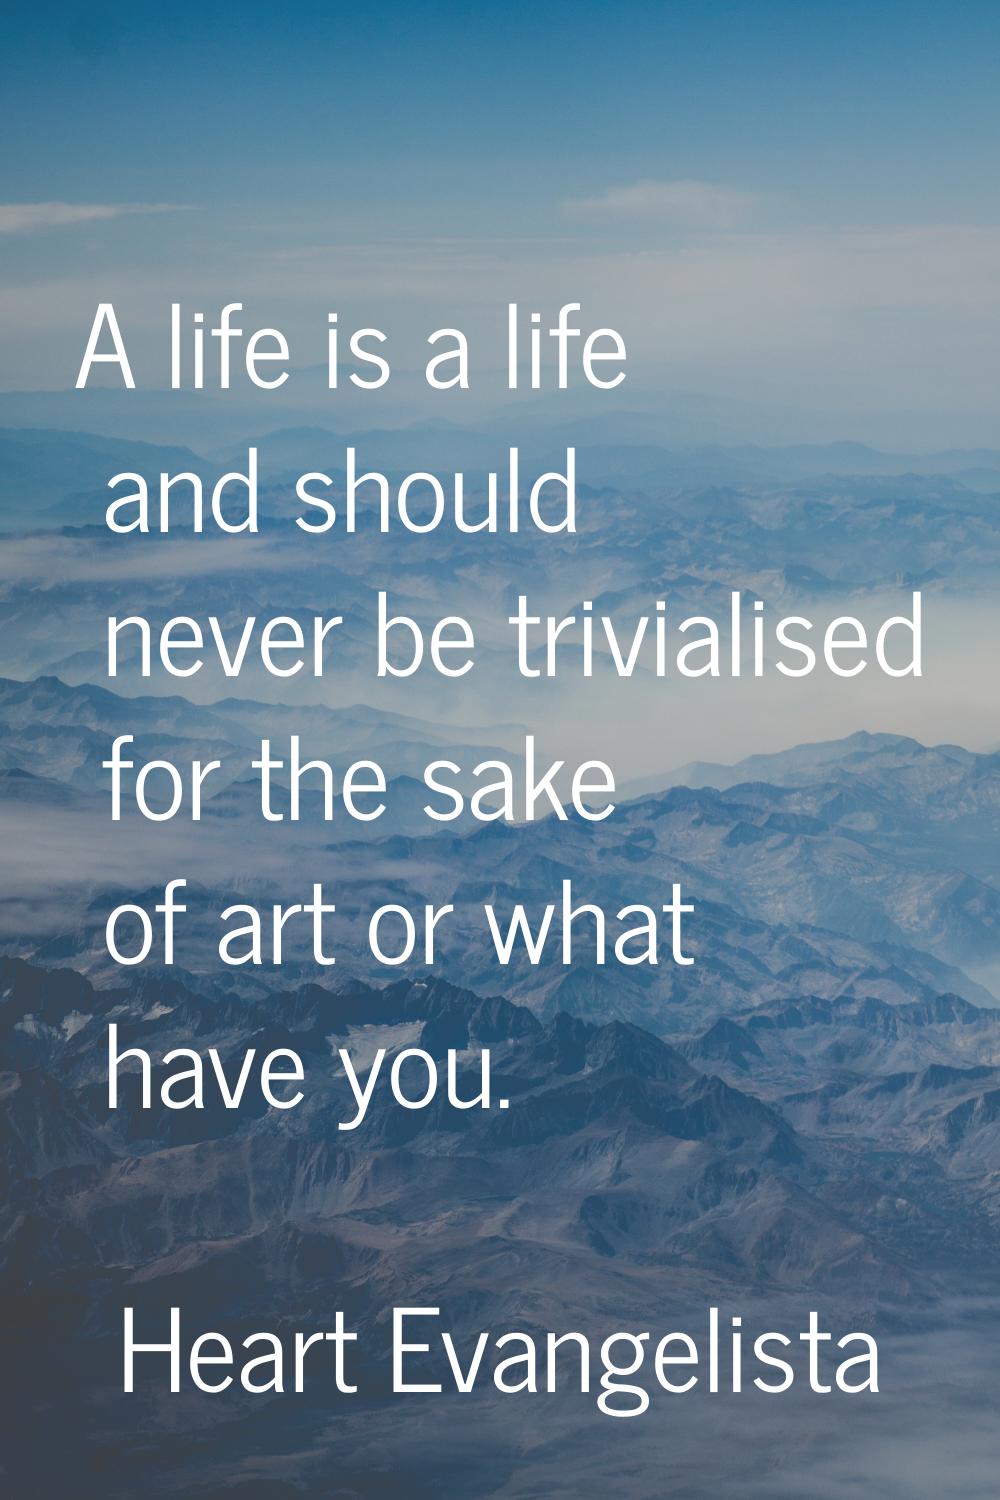 A life is a life and should never be trivialised for the sake of art or what have you.